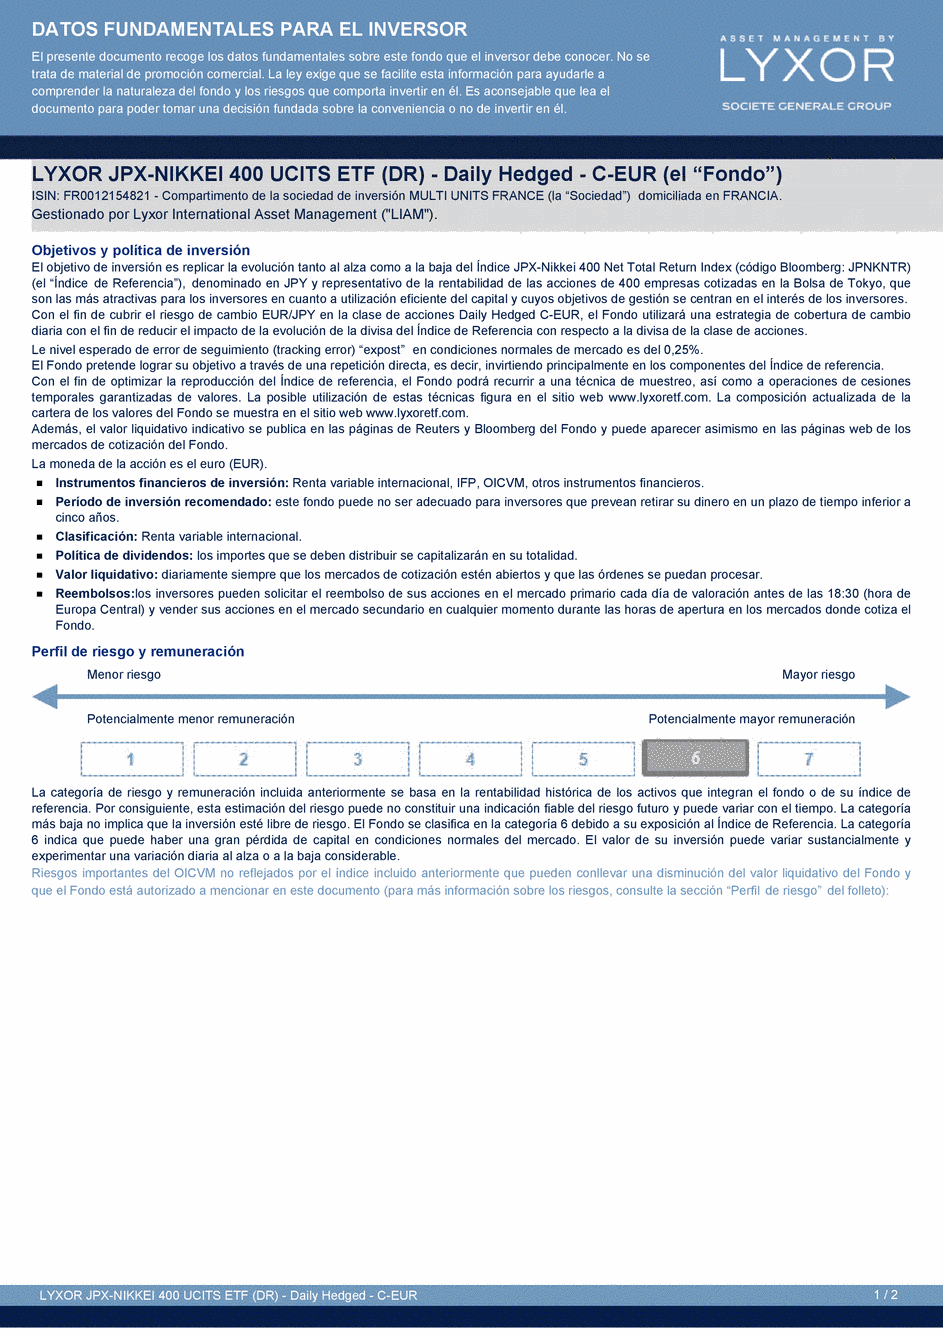 DICI LYXOR JPX-NIKKEI 400 UCITS ETF (DR) Daily Hedged C-EUR - 20/08/2015 - Espagnol